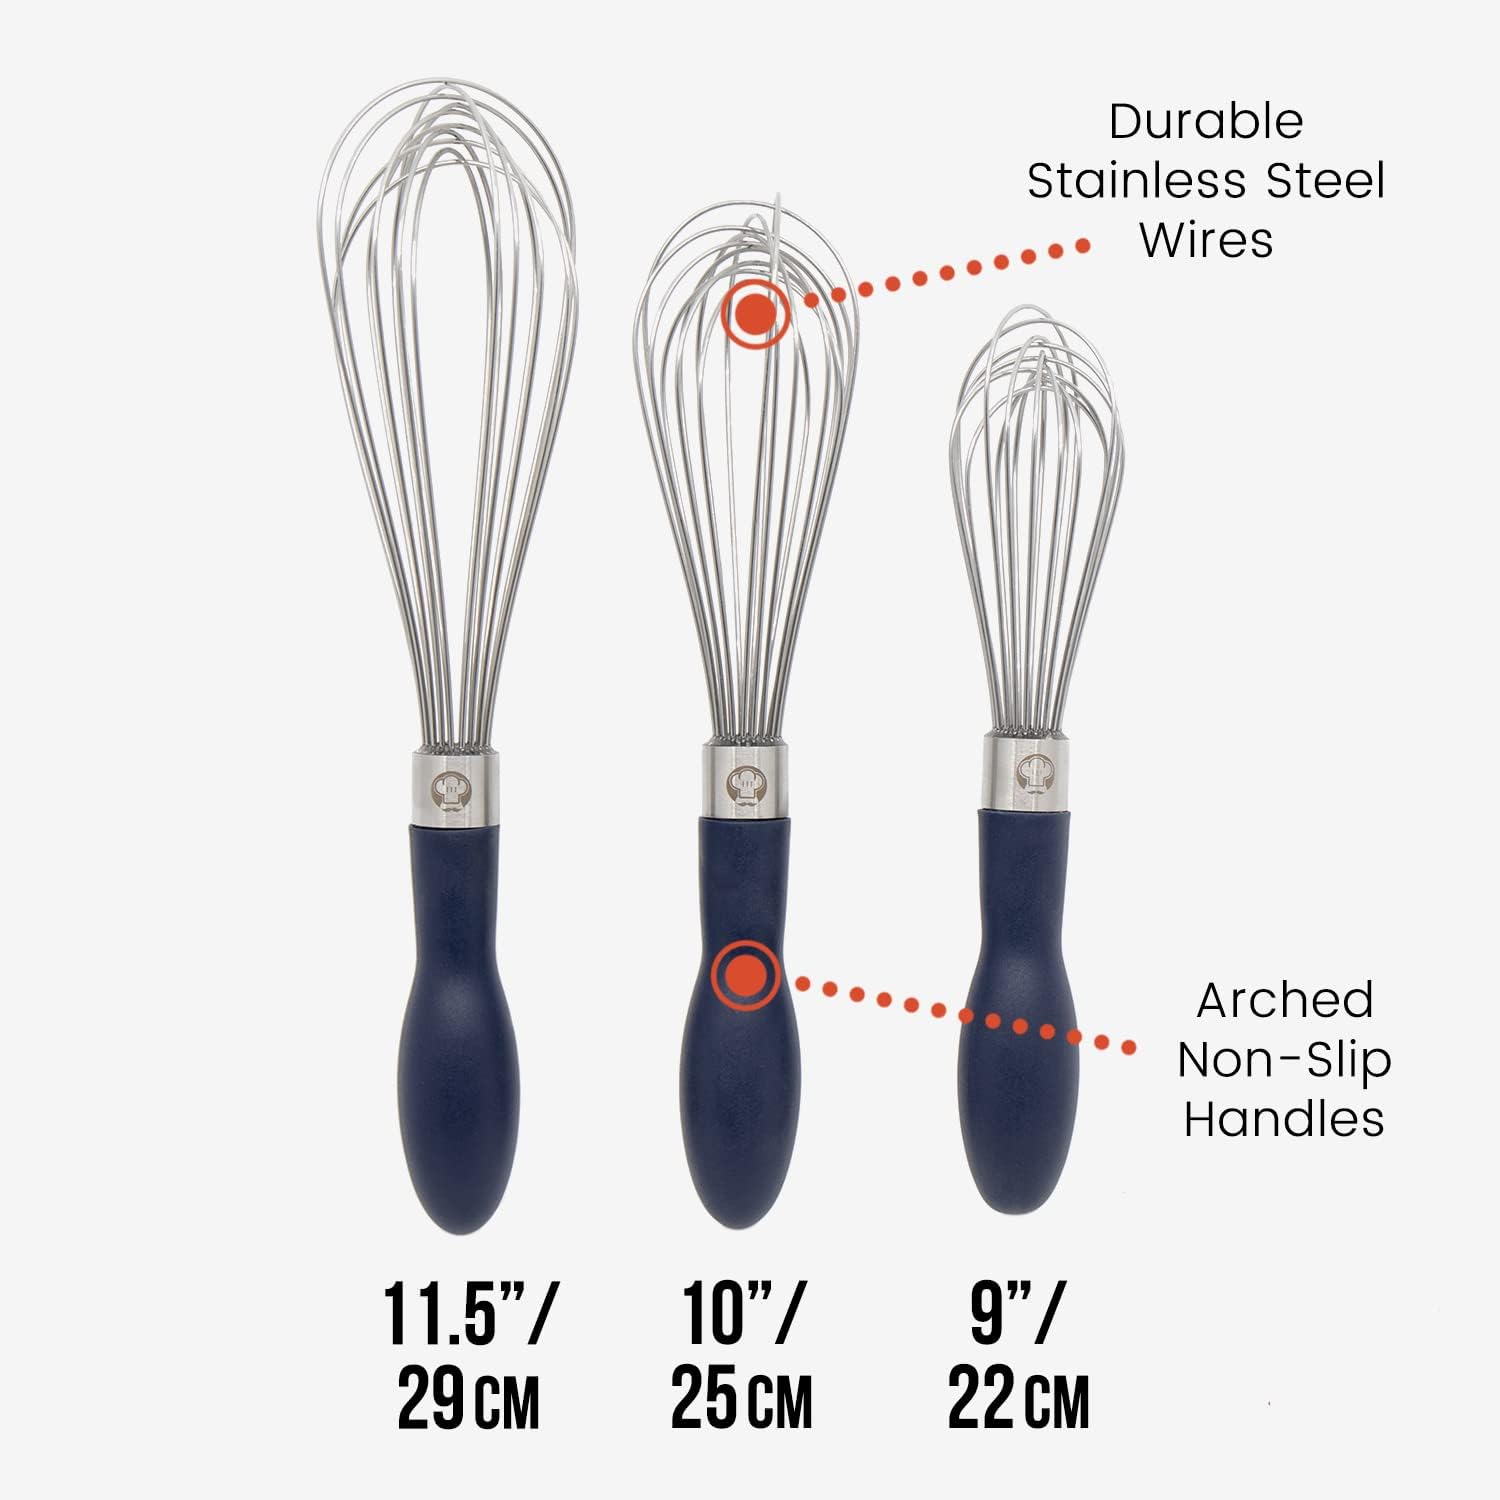 OXO Good Grips 2-Piece Silicone Whisk Set